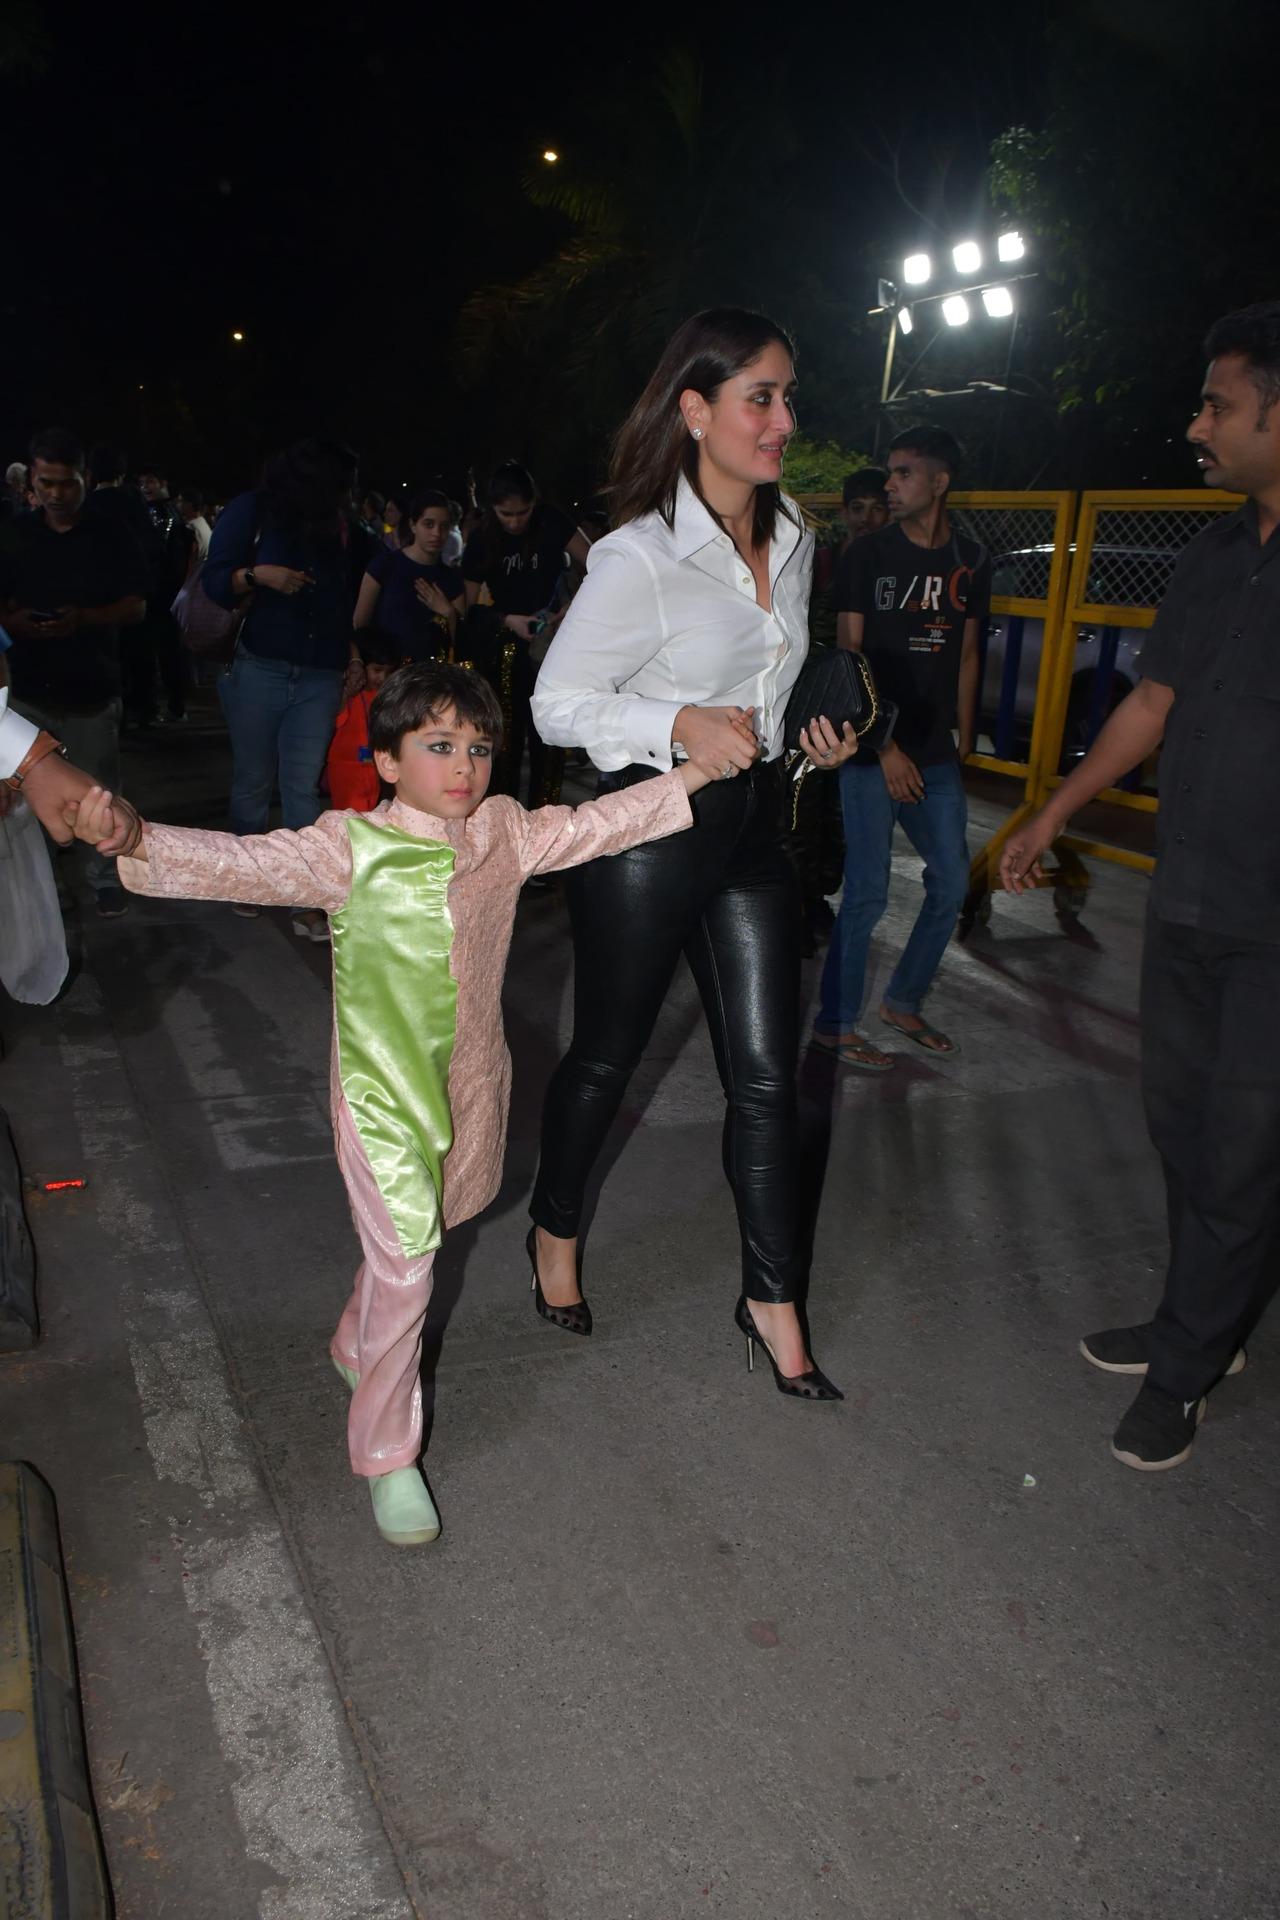 Taimur Ali Khan was seen performing in the school event. In a viral video, Kareena was seen fulfilling mommy duties as she enthusiastically recorded her son's performance on her phone